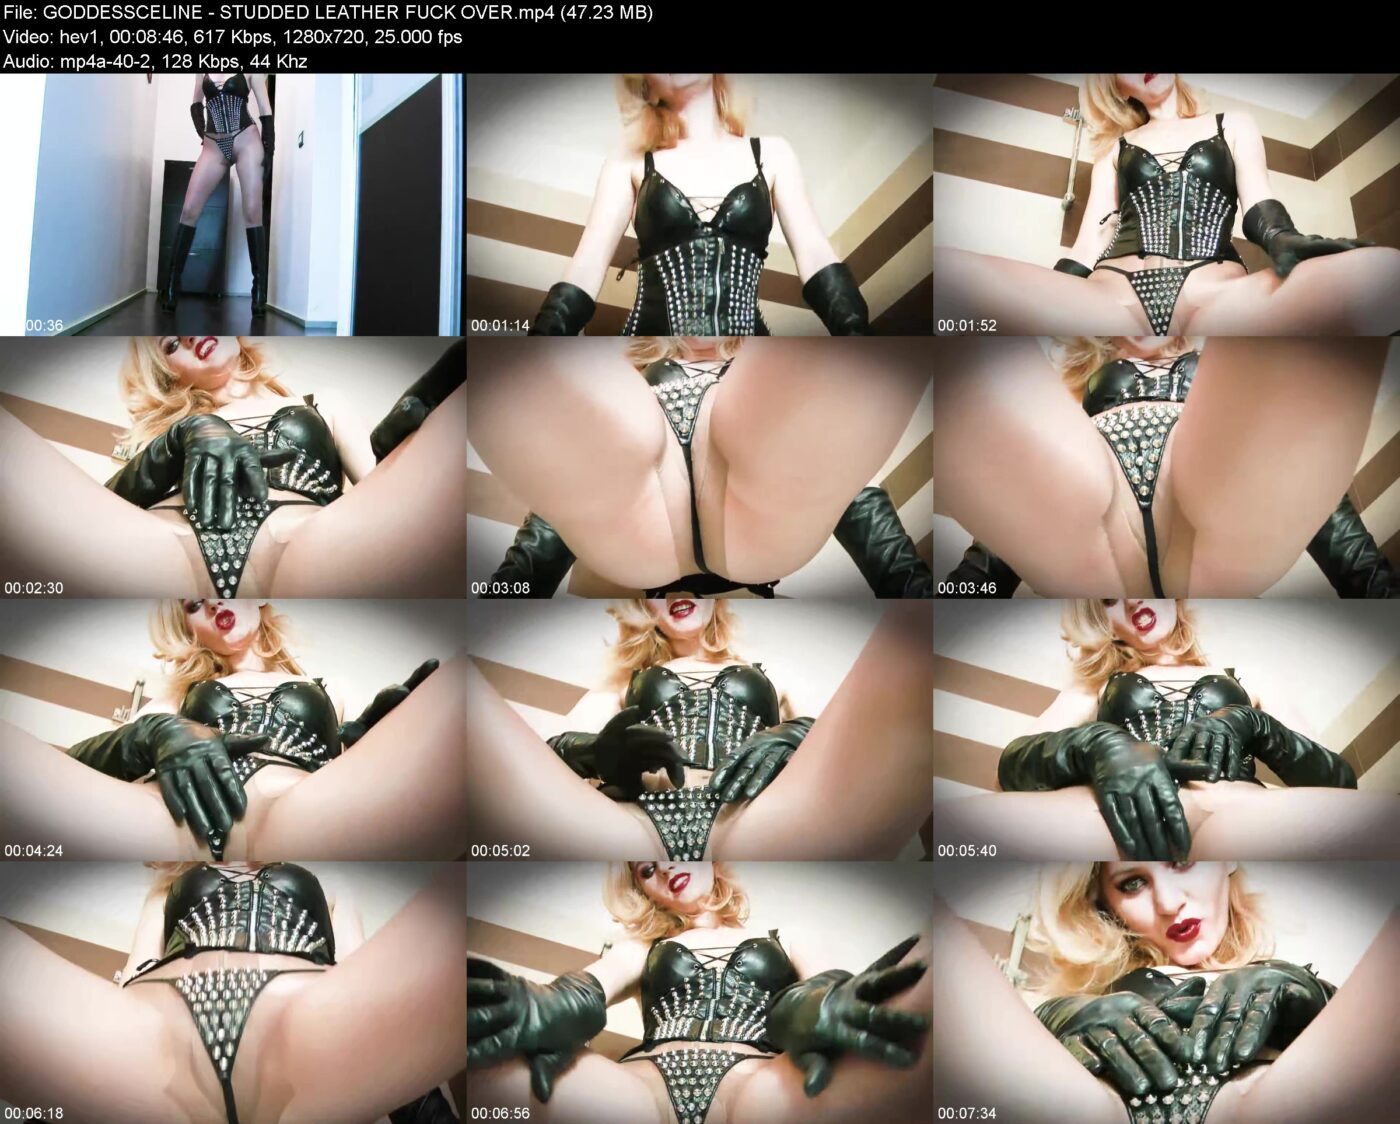 Actress: GODDESSCELINE. Title and Studio: STUDDED LEATHER FUCK OVER